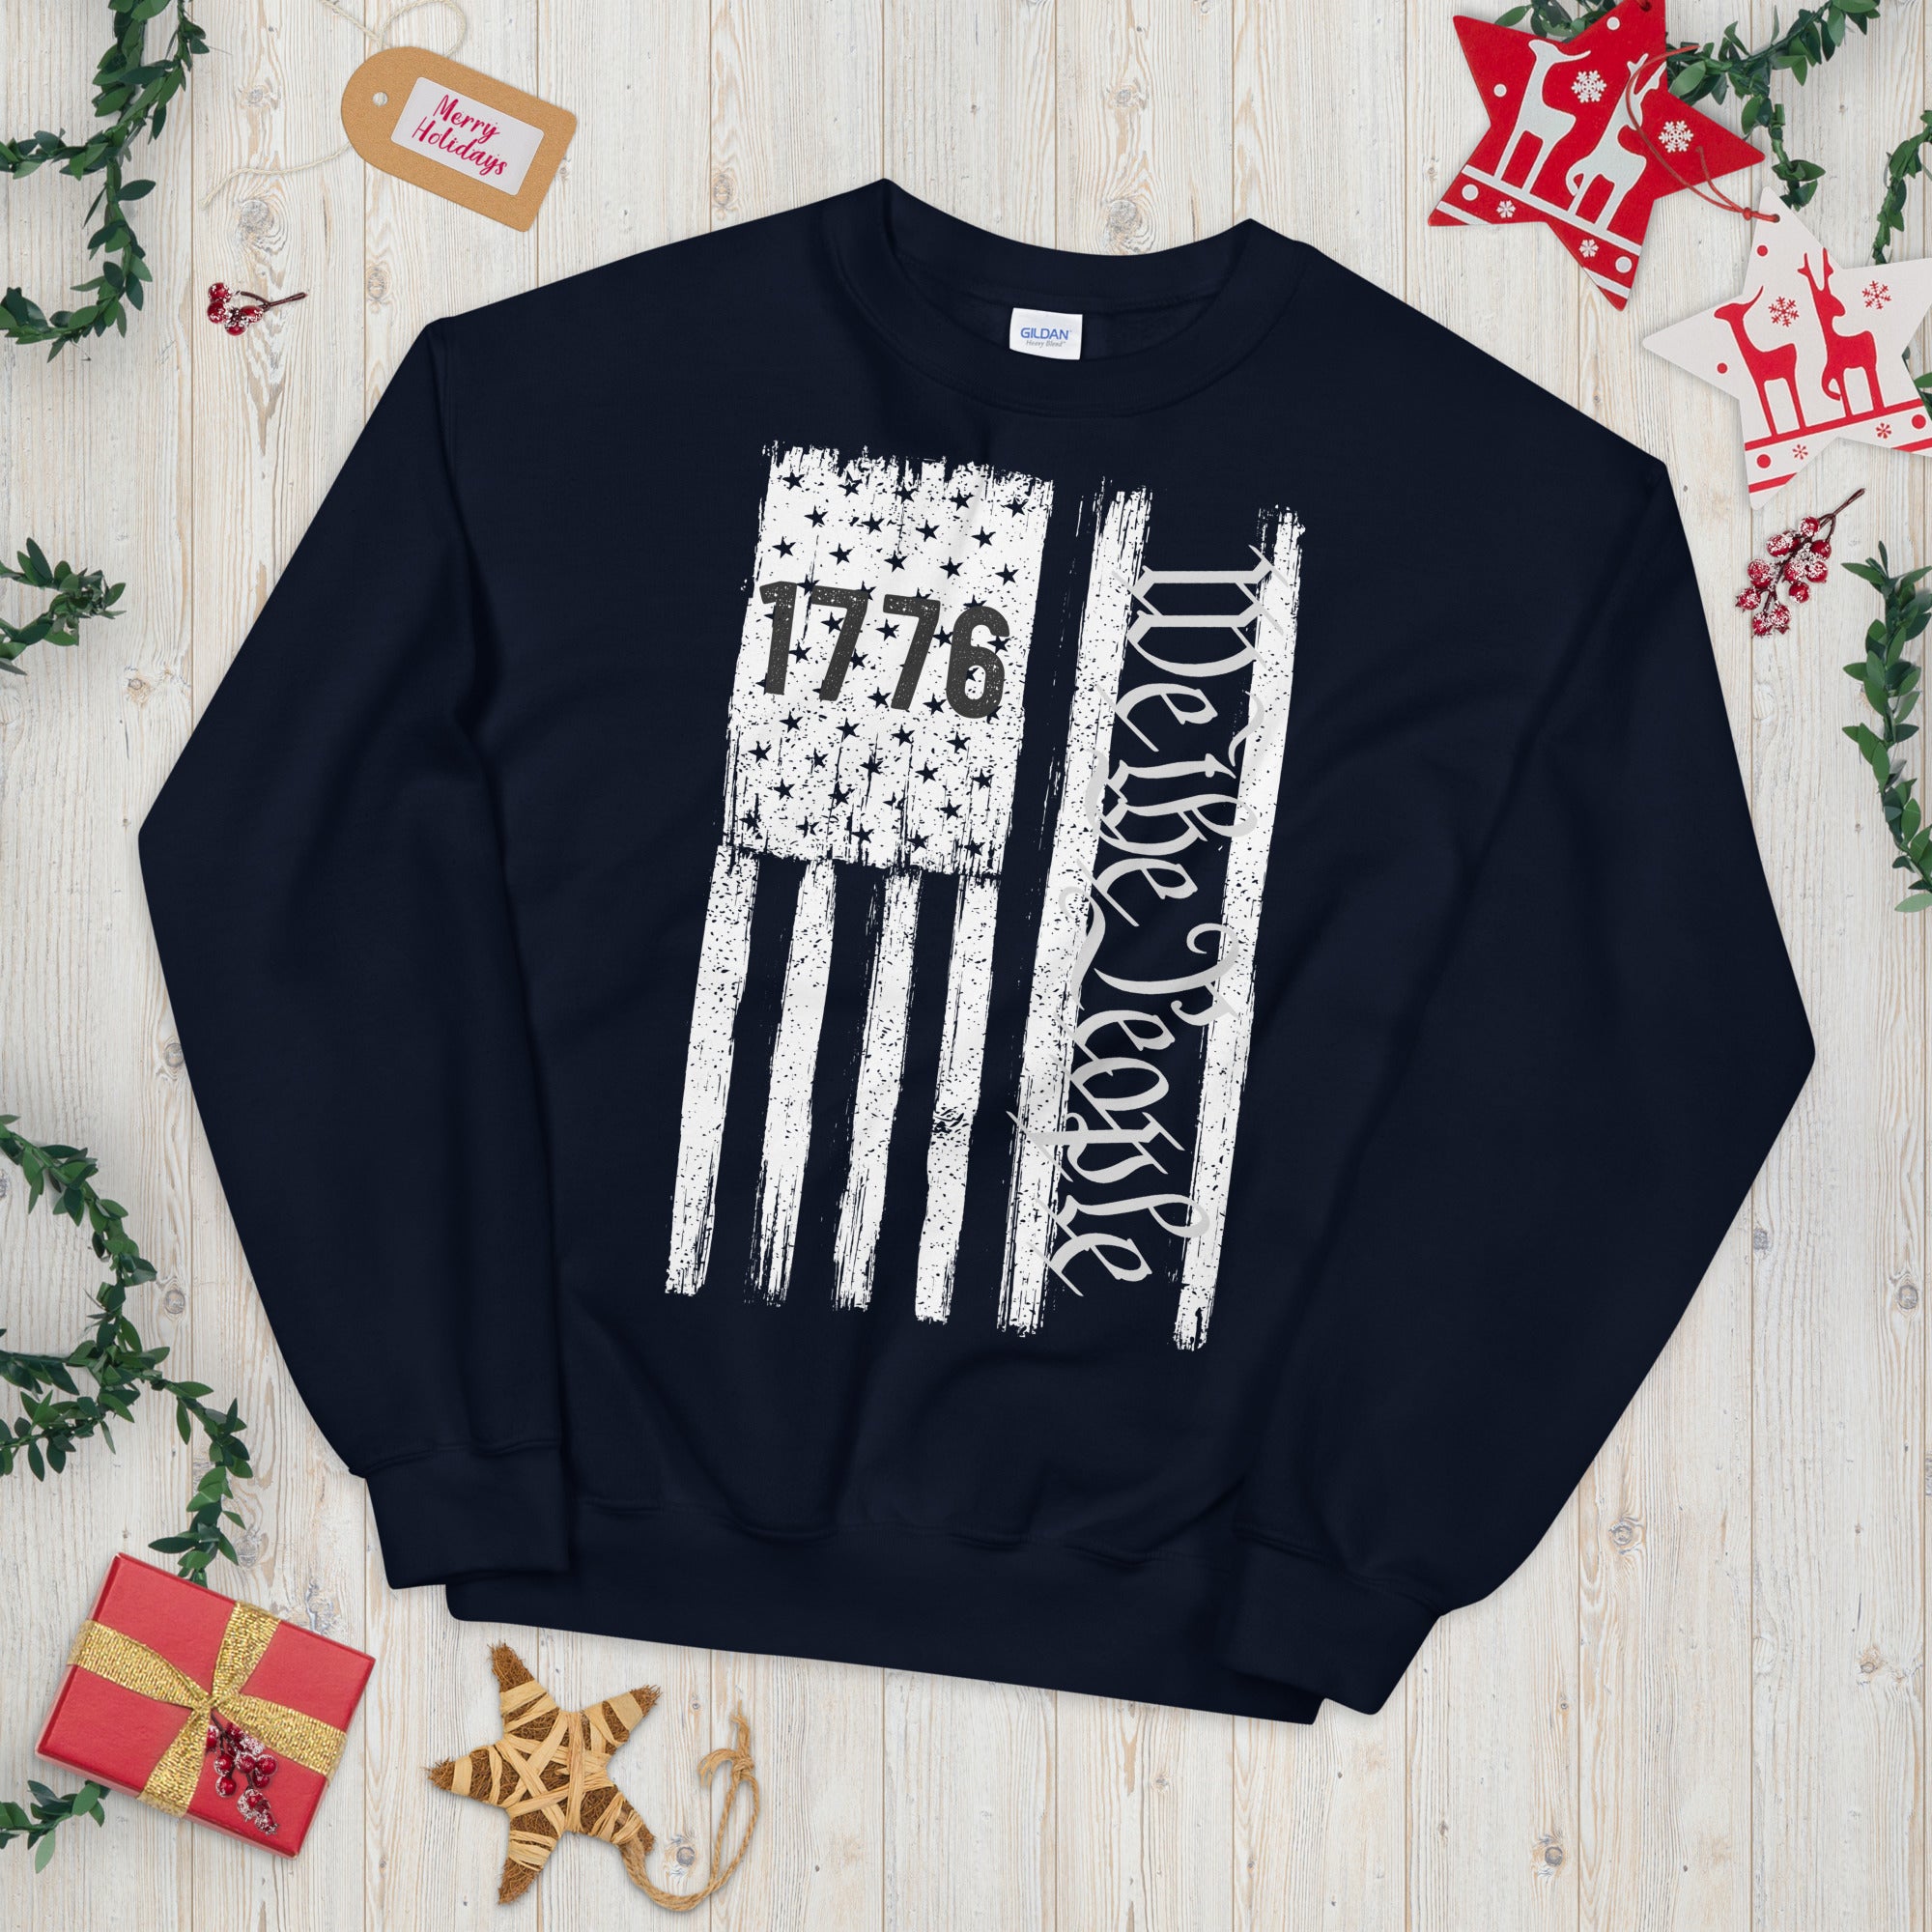 1776 We The People Sweater, Patriotic USA American Flag, Vintage US Flag Shirt, Independence Day, 1776 Sweater, We the people patriotic gift